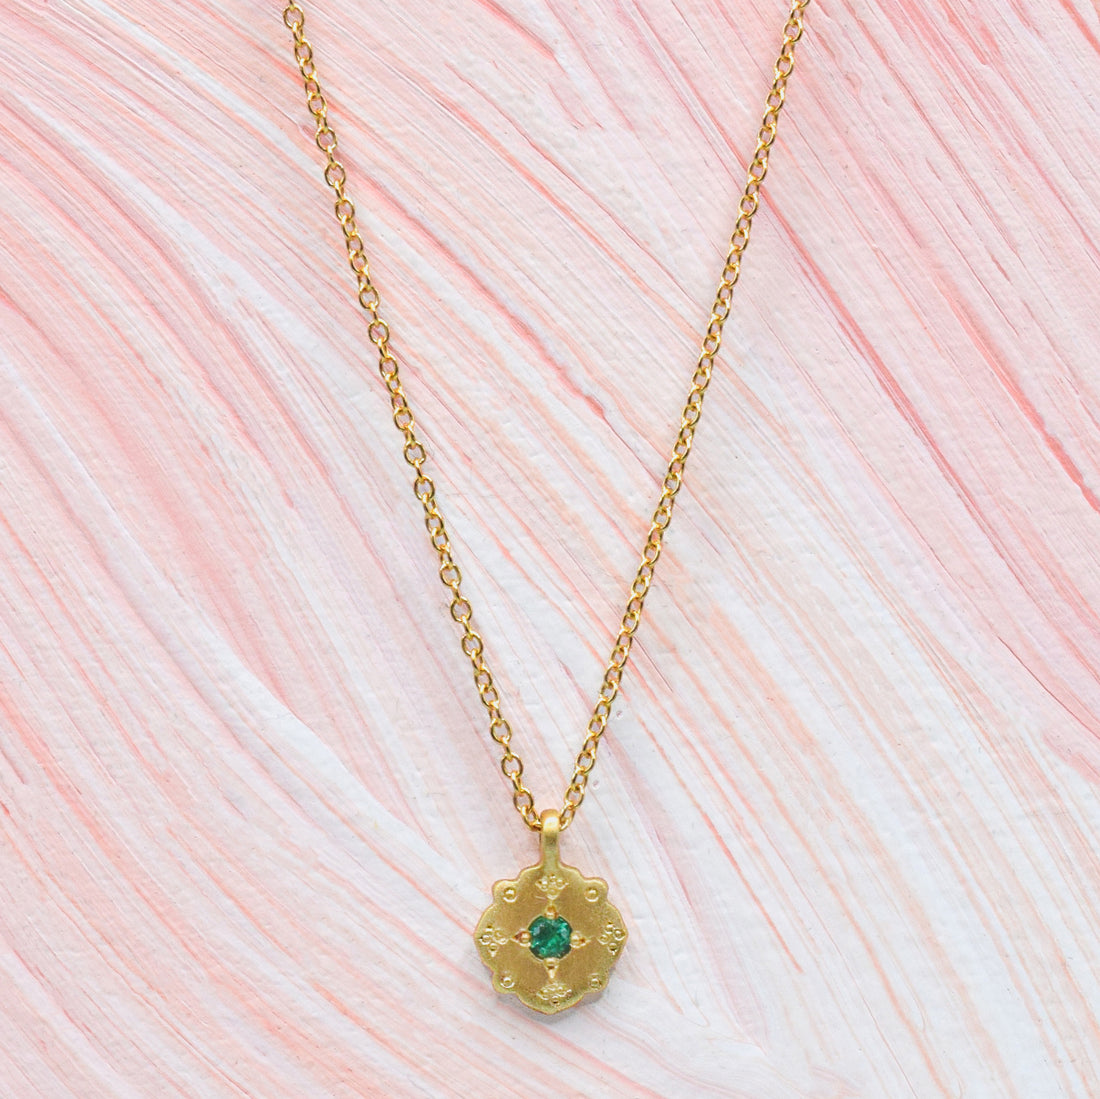 Gold "Drops of Happiness" Necklace with Emerald Center